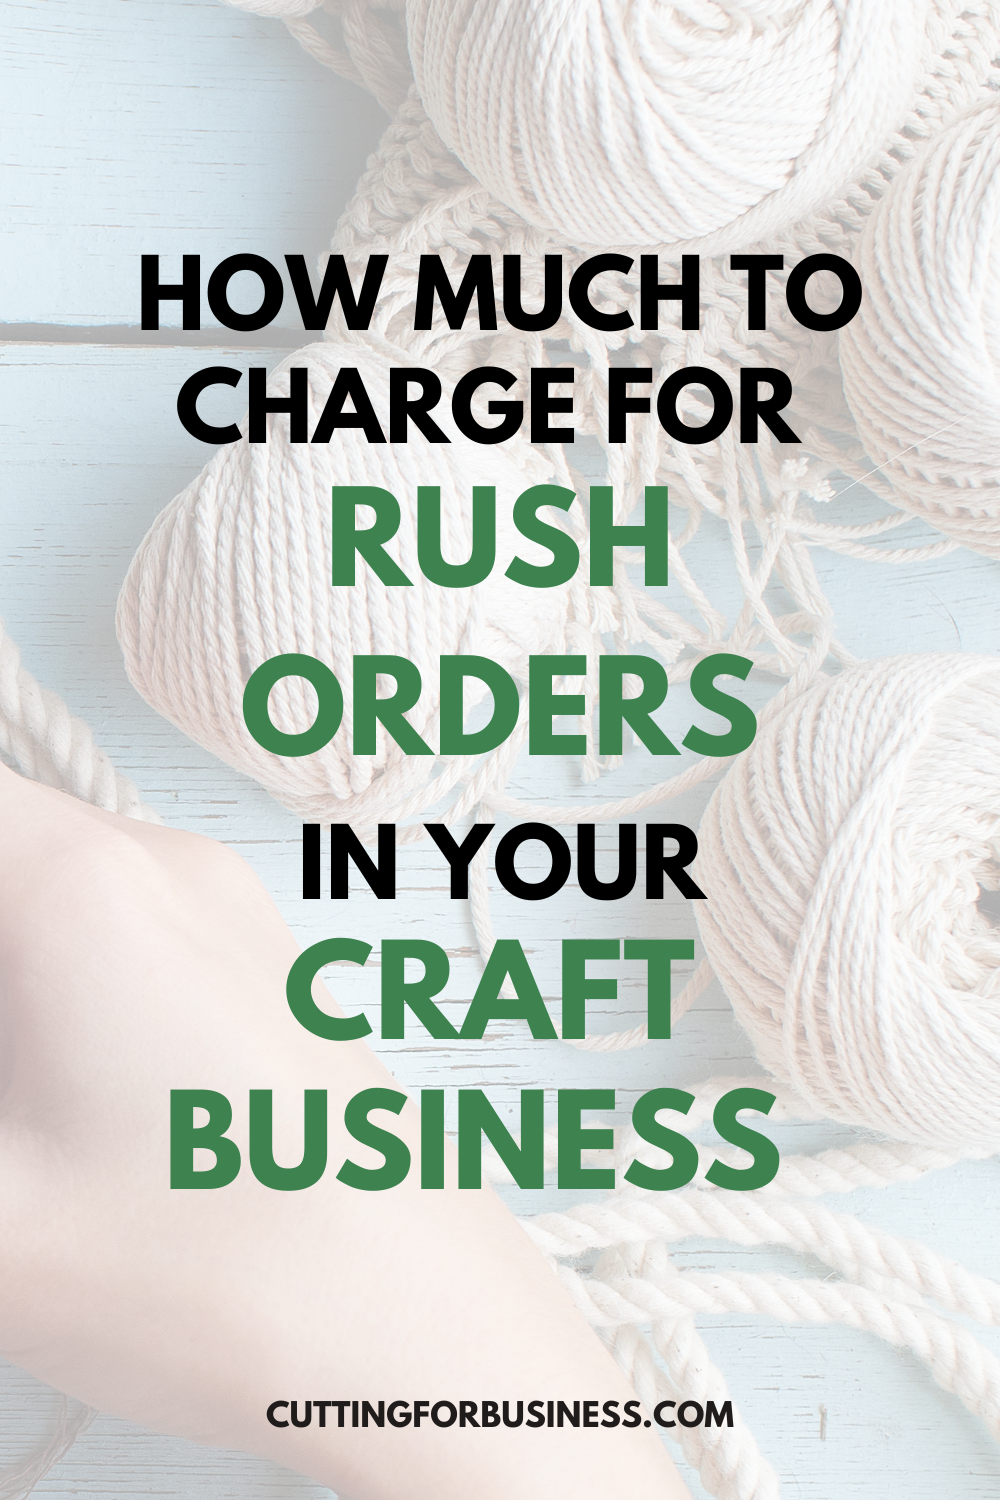 How Much to Charge for Rush Orders in Your Craft Business - Great for Silhouette, Cricut, Juliet, and Glowforge crafters- by cuttingforbusiness.com